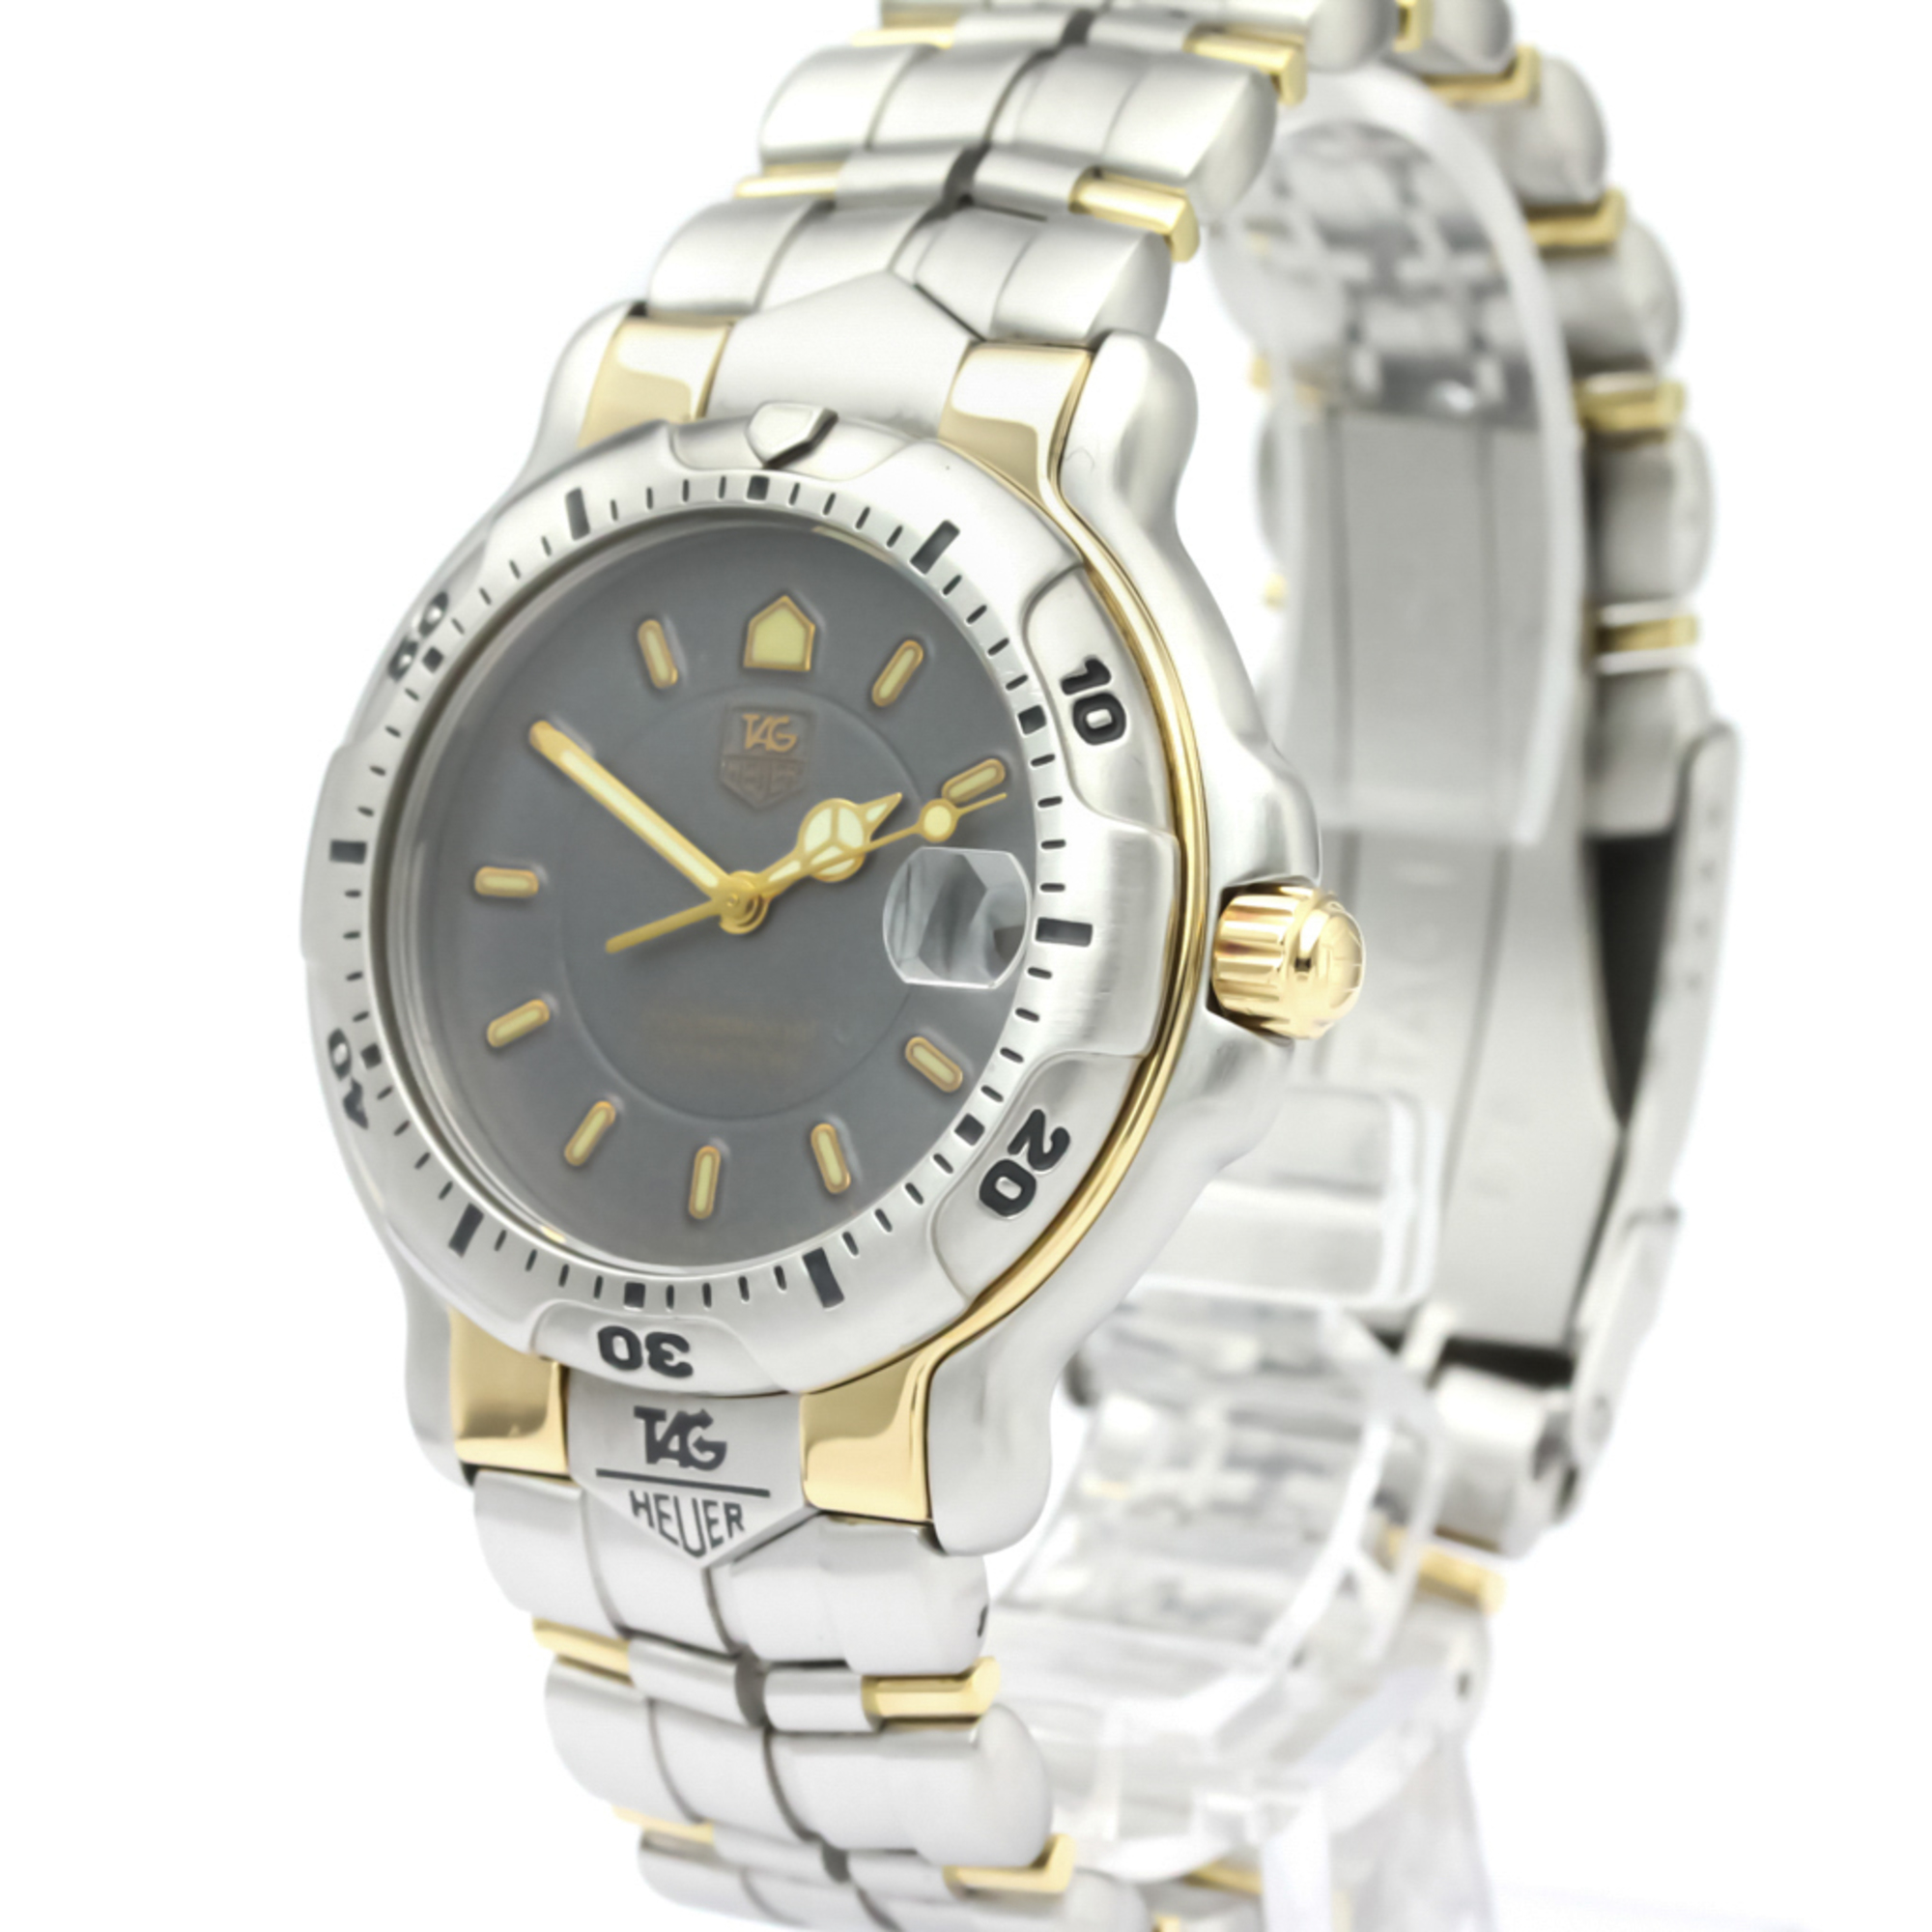 Tag Heuer 6000 Series Quartz Stainless Steel,Yellow Gold (18K) Men's Sports Watch WH1152